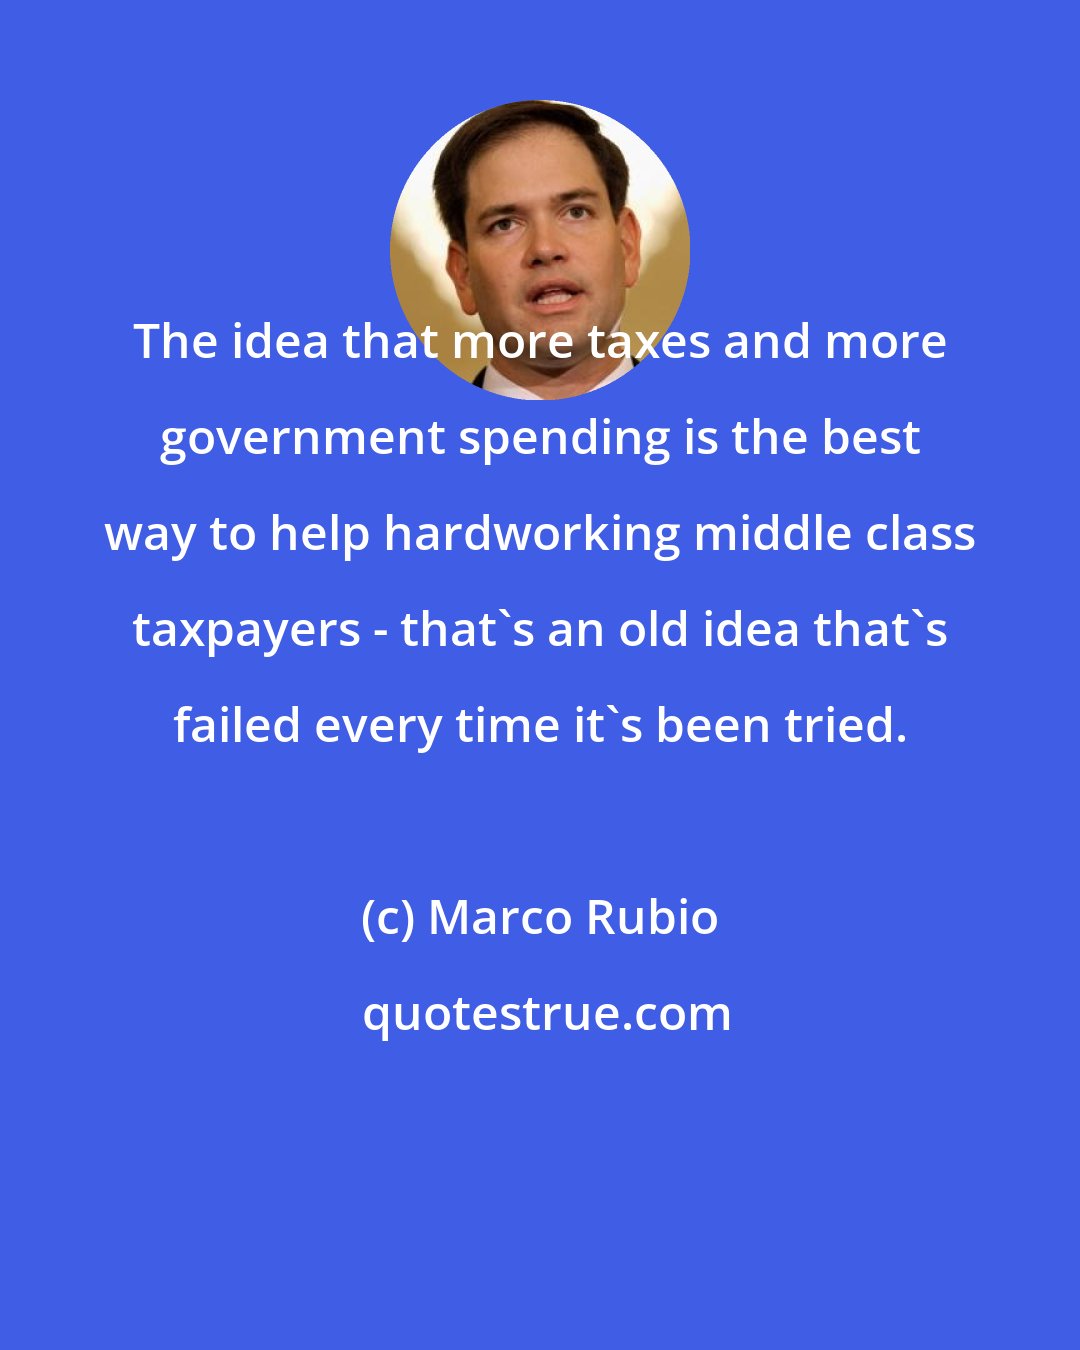 Marco Rubio: The idea that more taxes and more government spending is the best way to help hardworking middle class taxpayers - that's an old idea that's failed every time it's been tried.